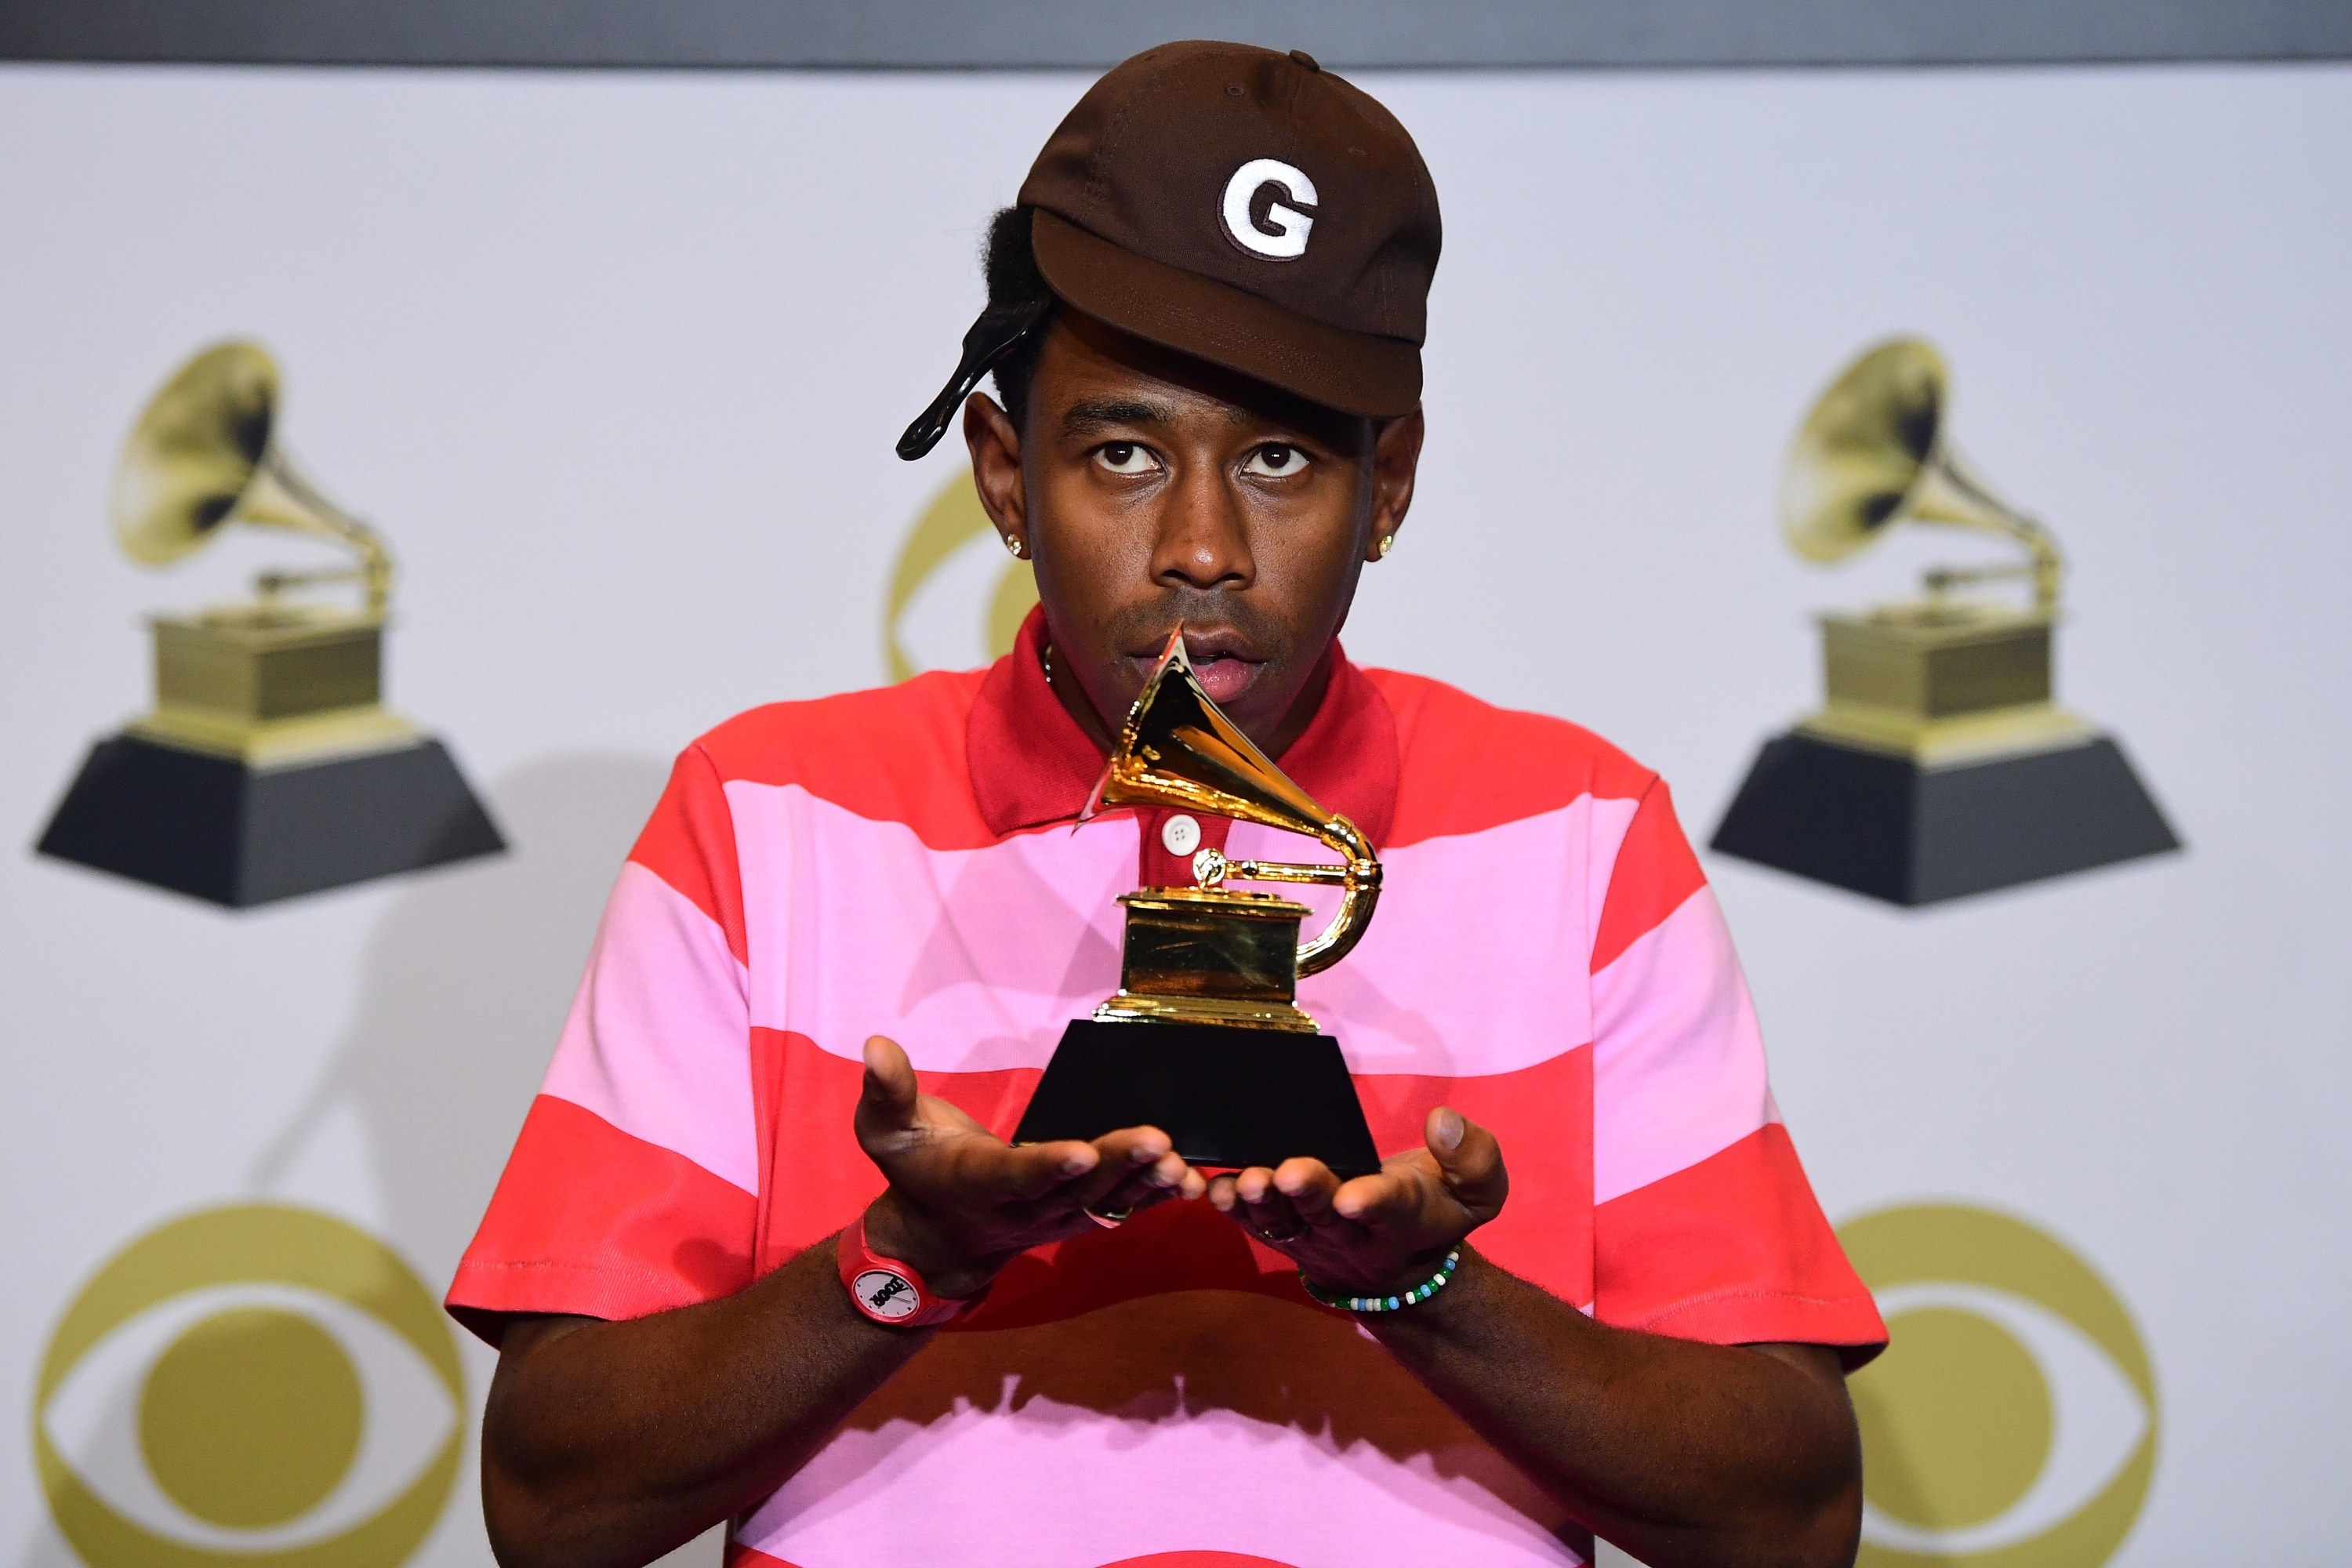 Recording Academy / GRAMMYs on Instagram: Tyler, The Creator is all packed  up and ready for the #GRAMMYs. 🙌